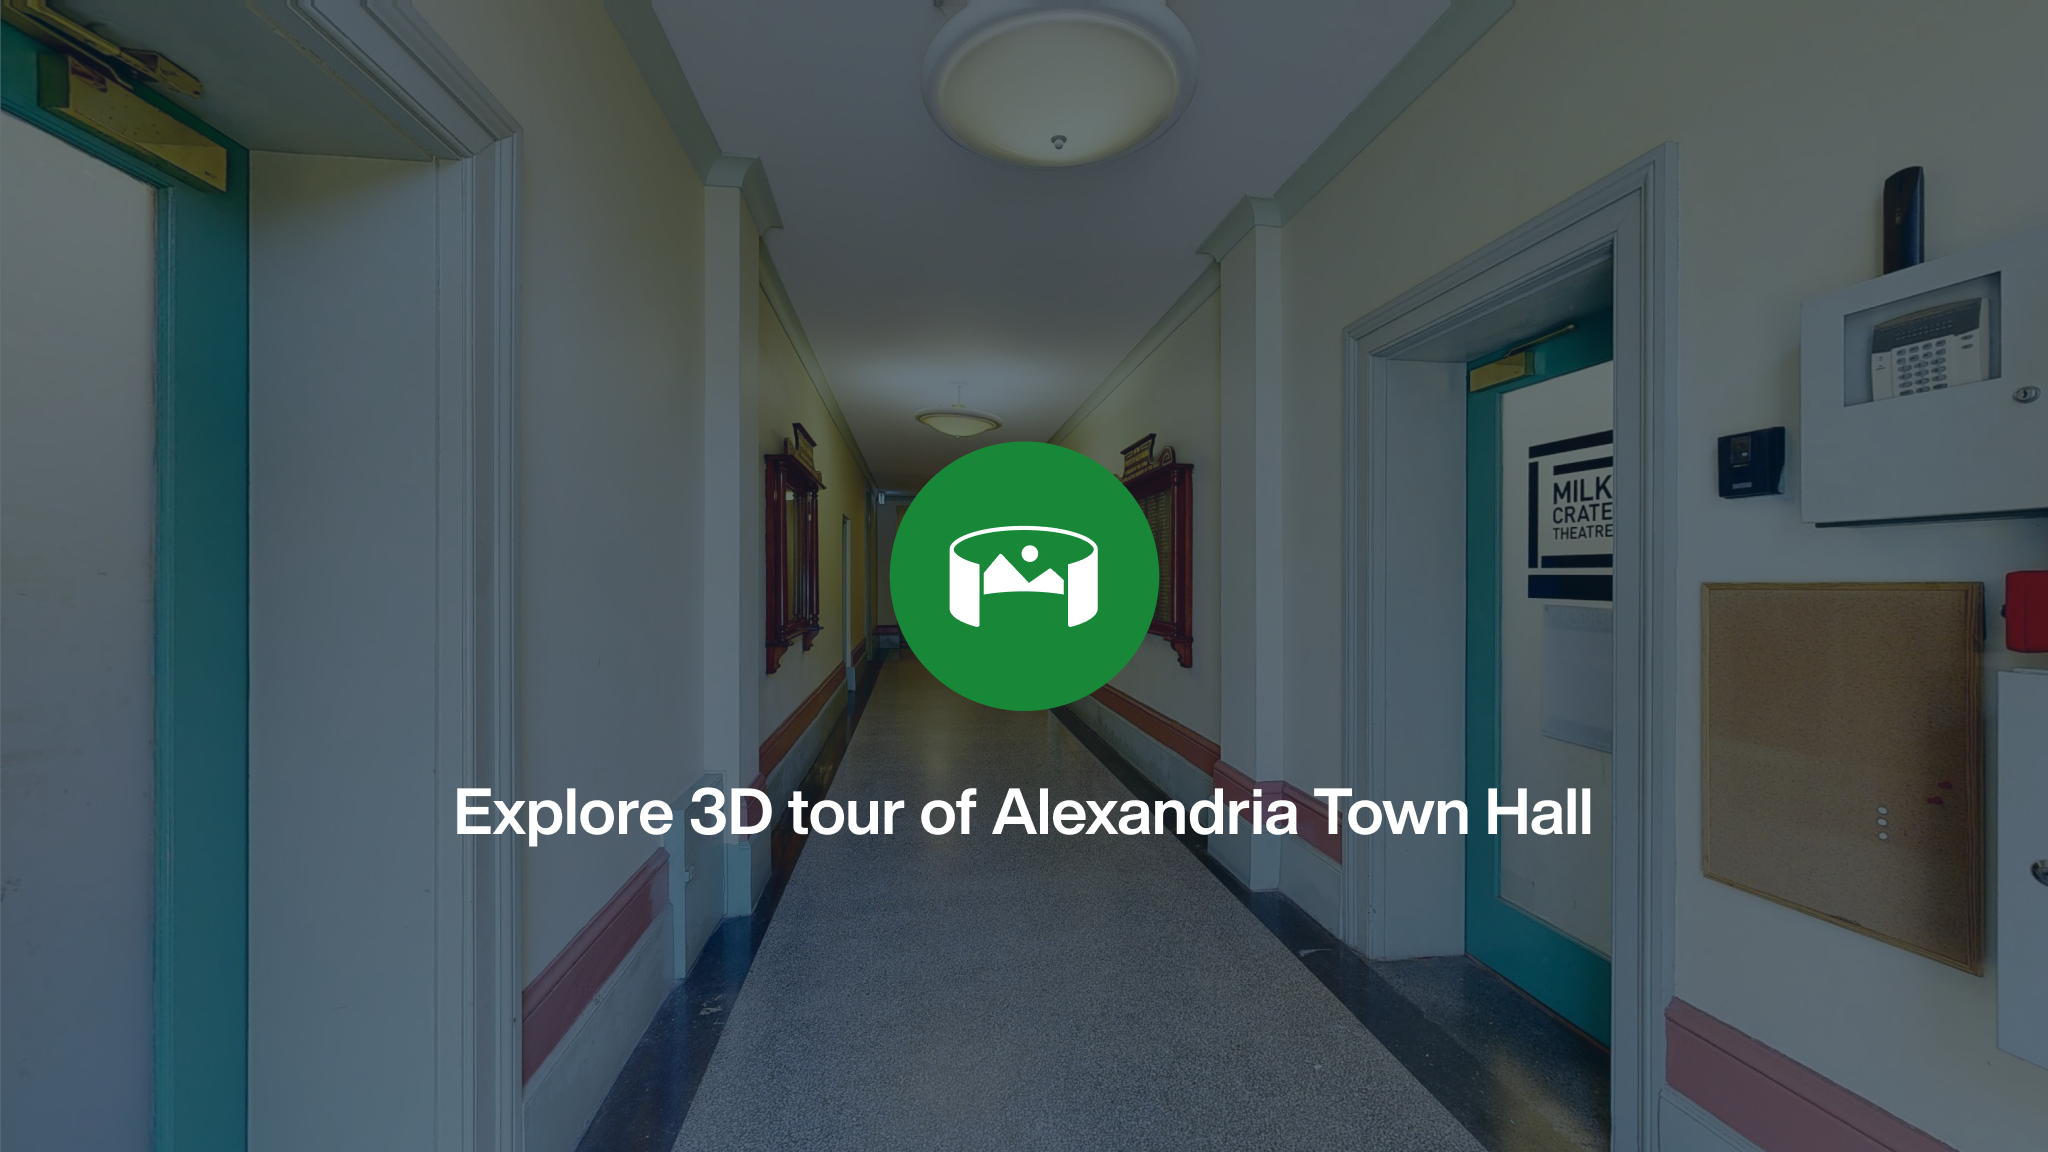 The front entrance to Alexandria Town Hall overlayed with a green icon and the words Explore 3D tour of Alexandria Town Hall.